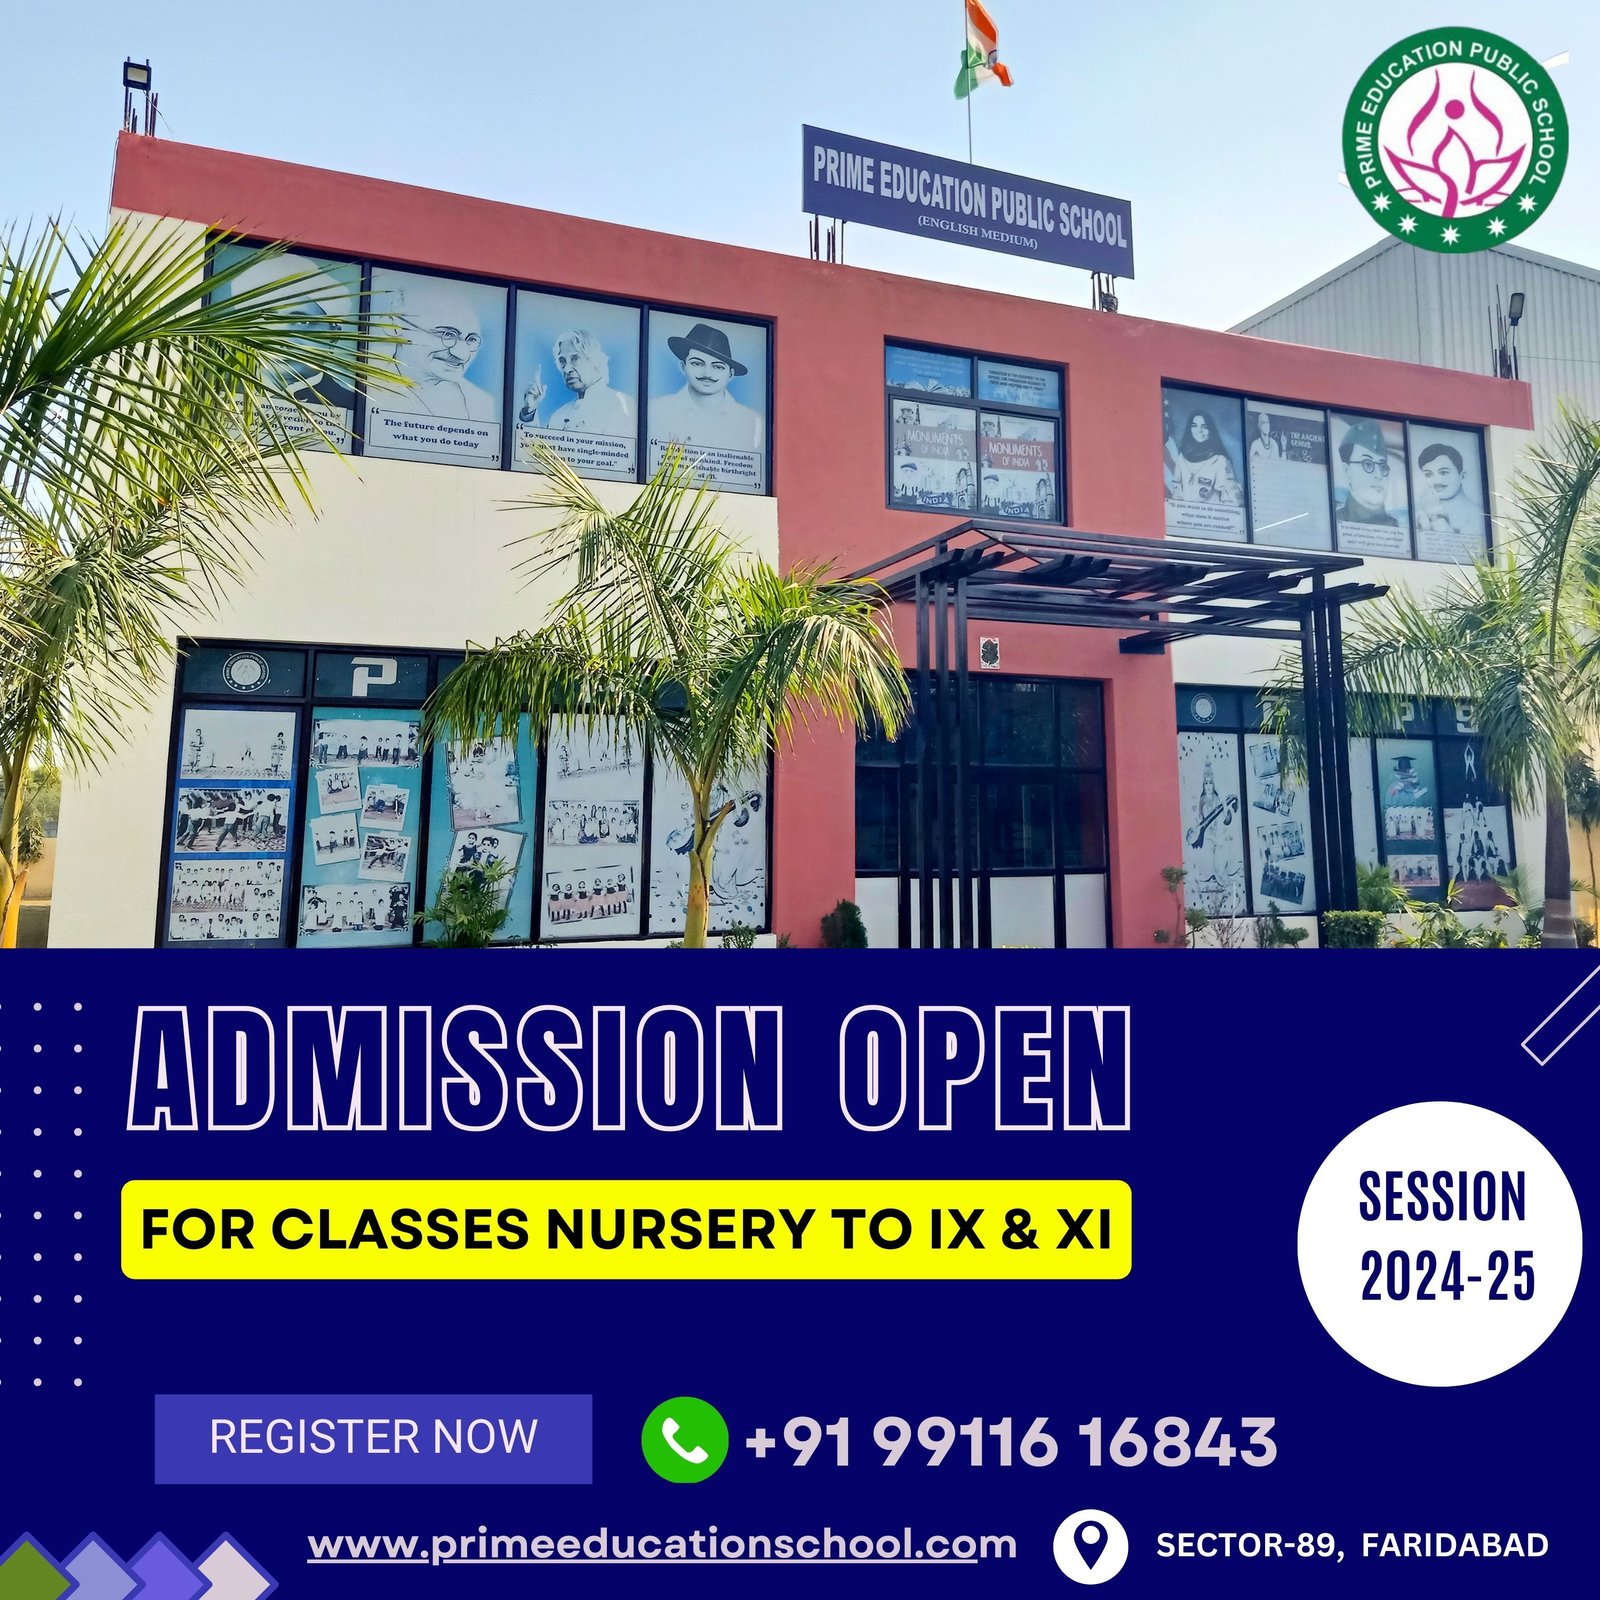 Prime Education Public School - Sector-89, Faridabad Admission Open For 2024-2025